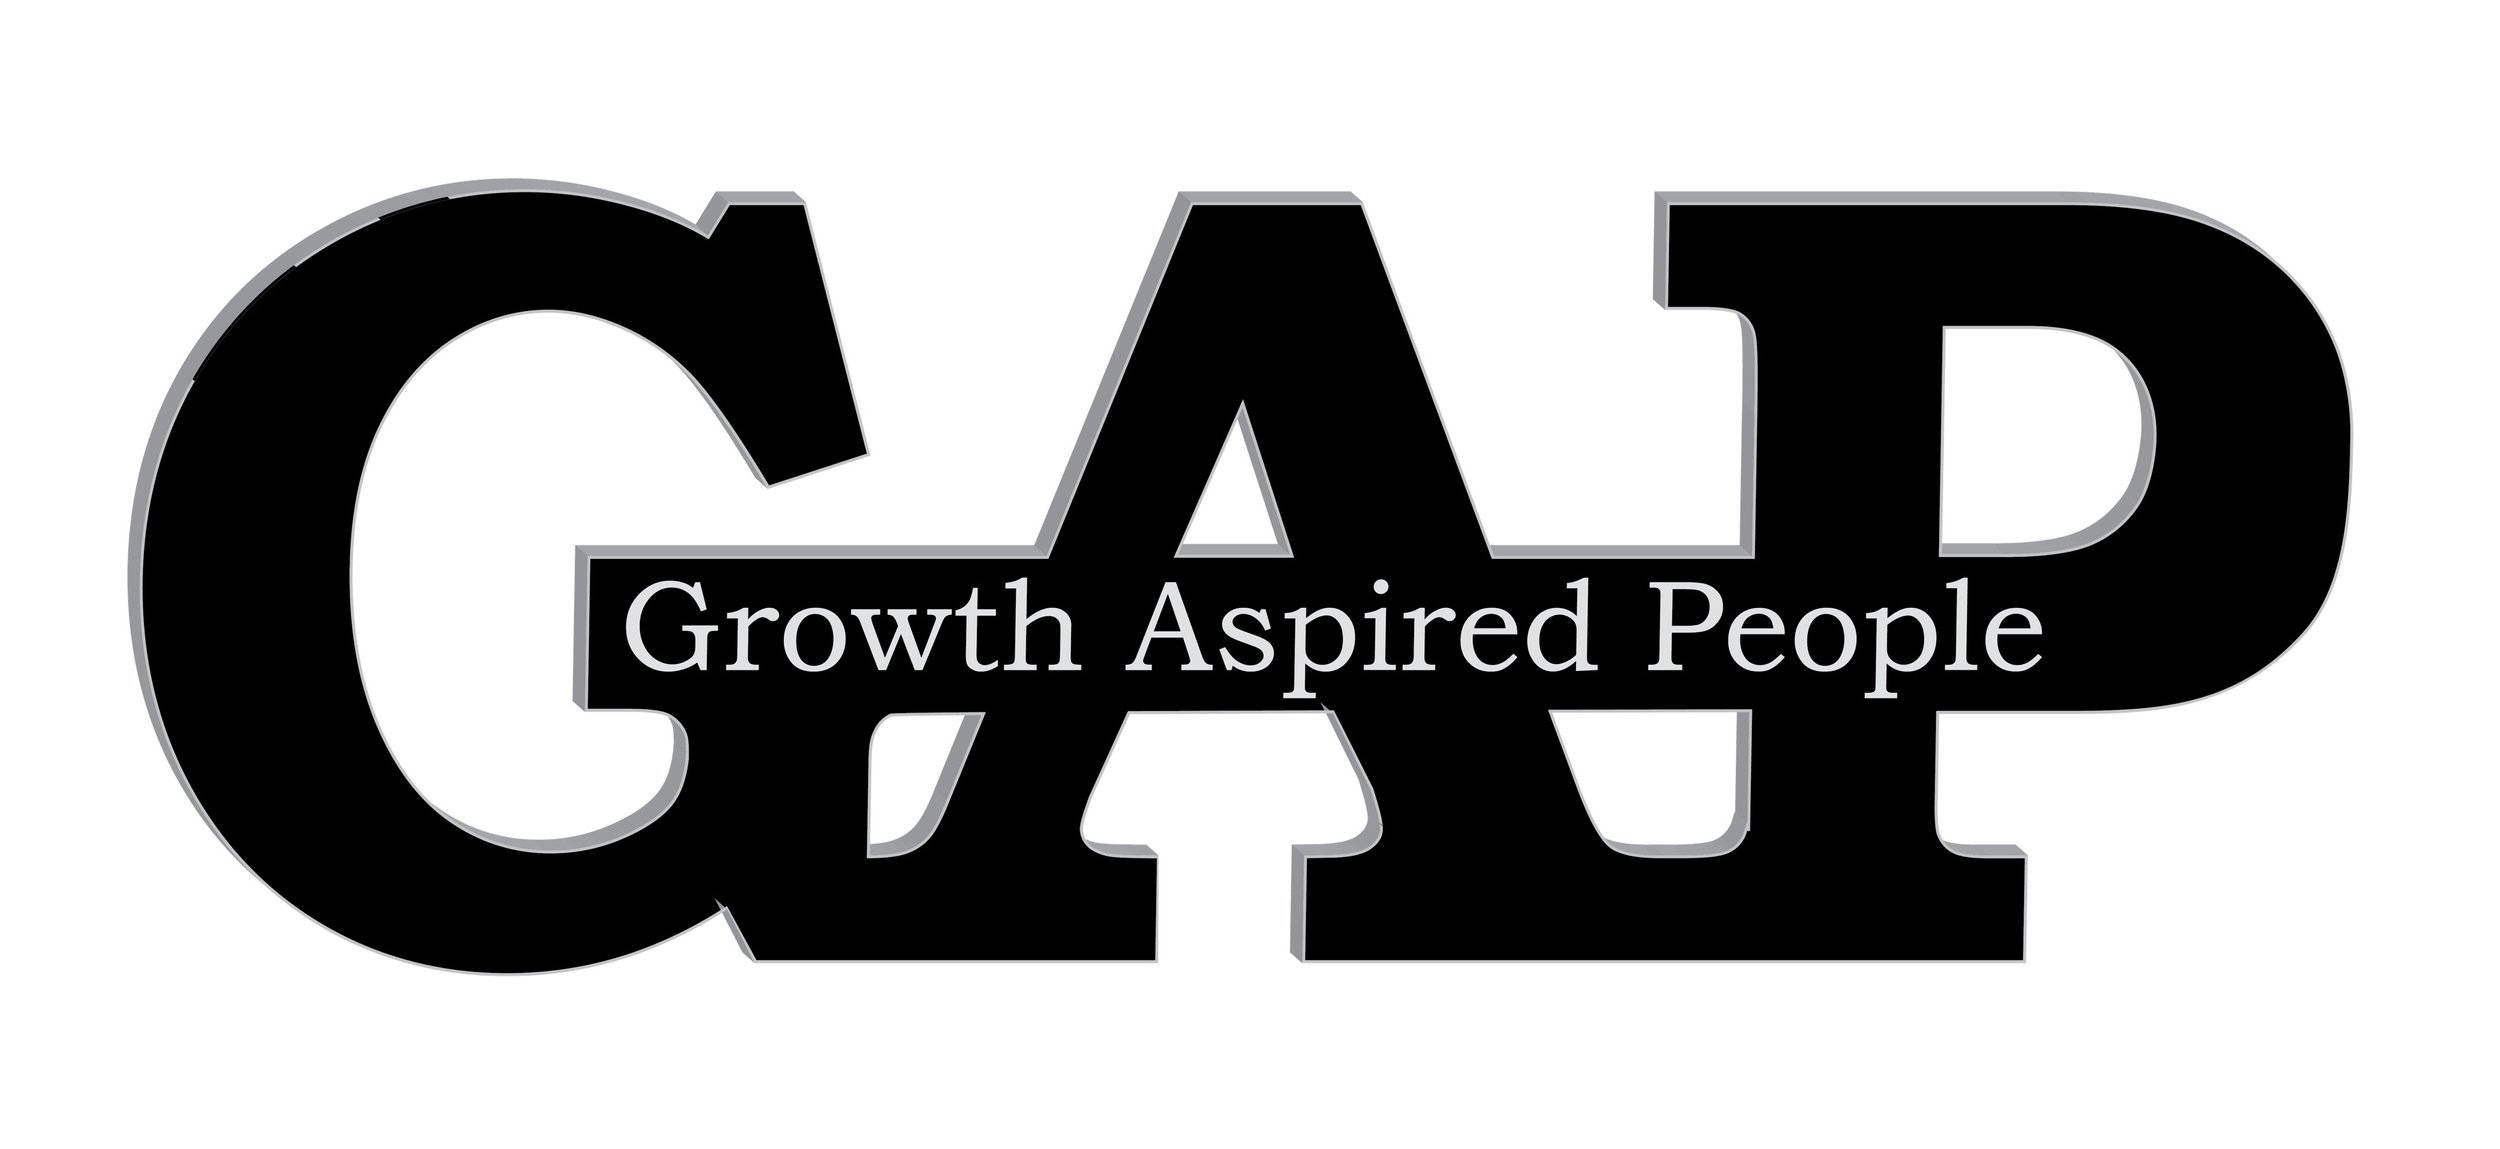 Growth Aspired People